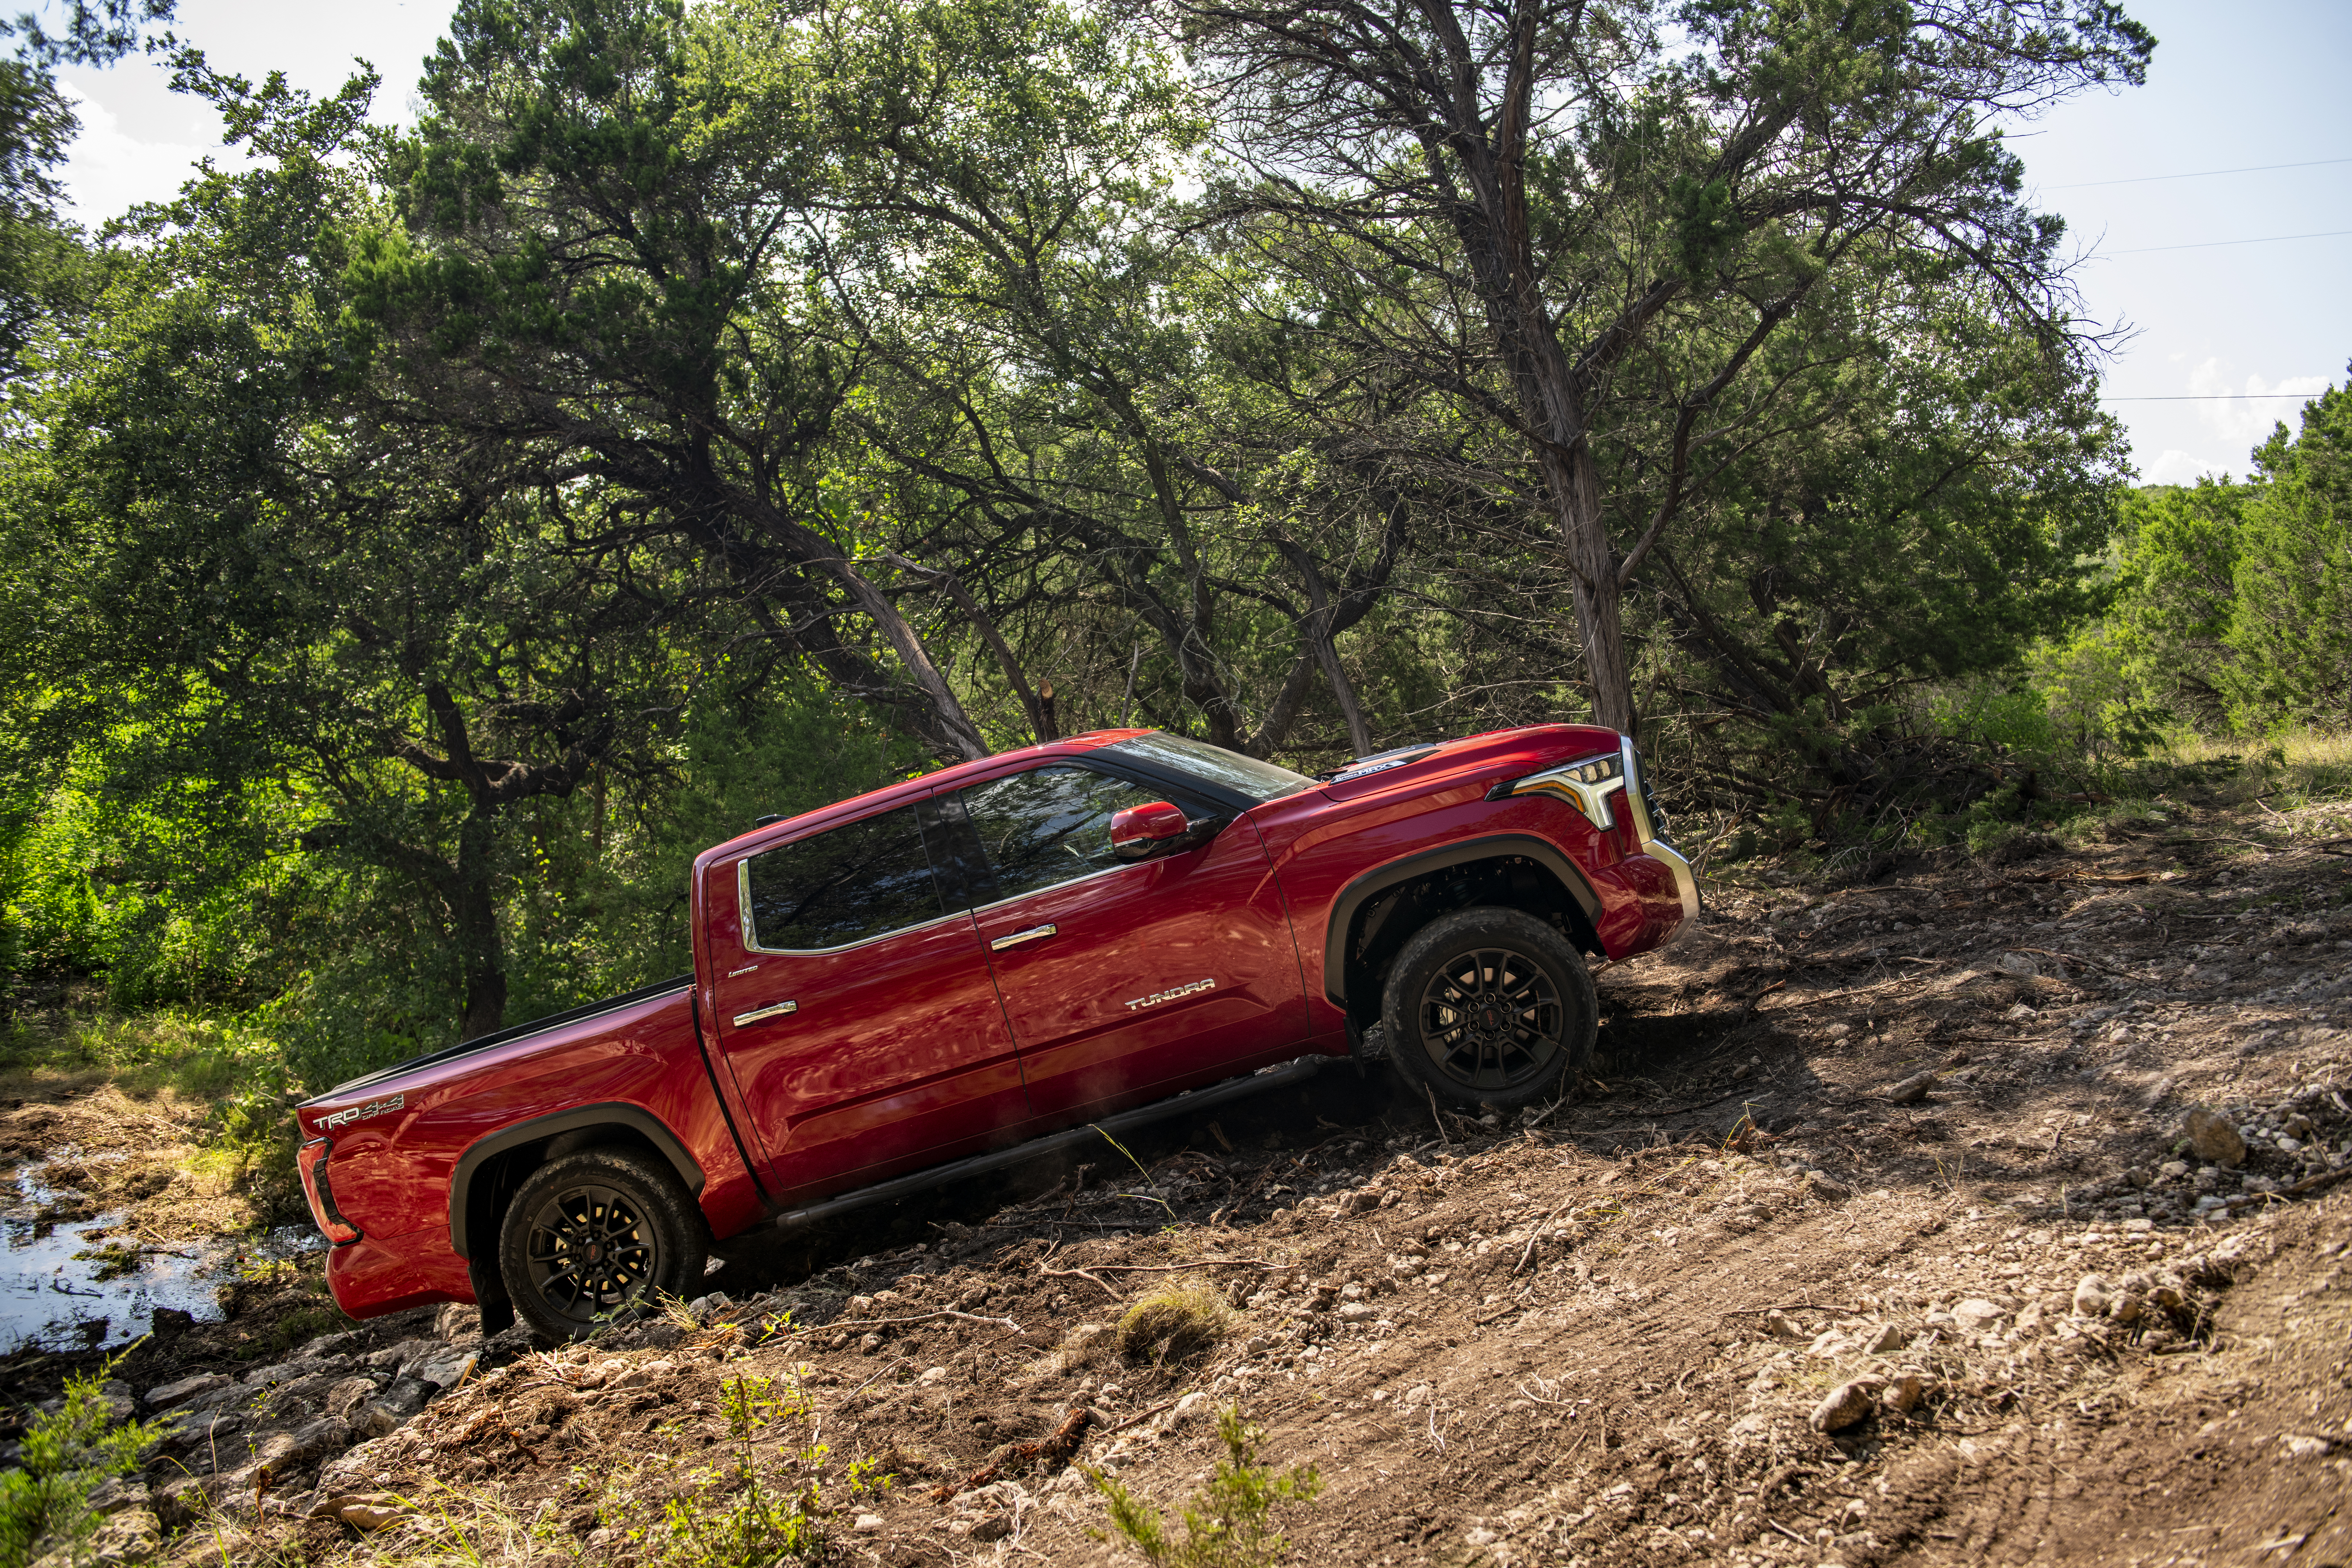 The tundra is a solid choice if you want the best all-around capability in a truck.